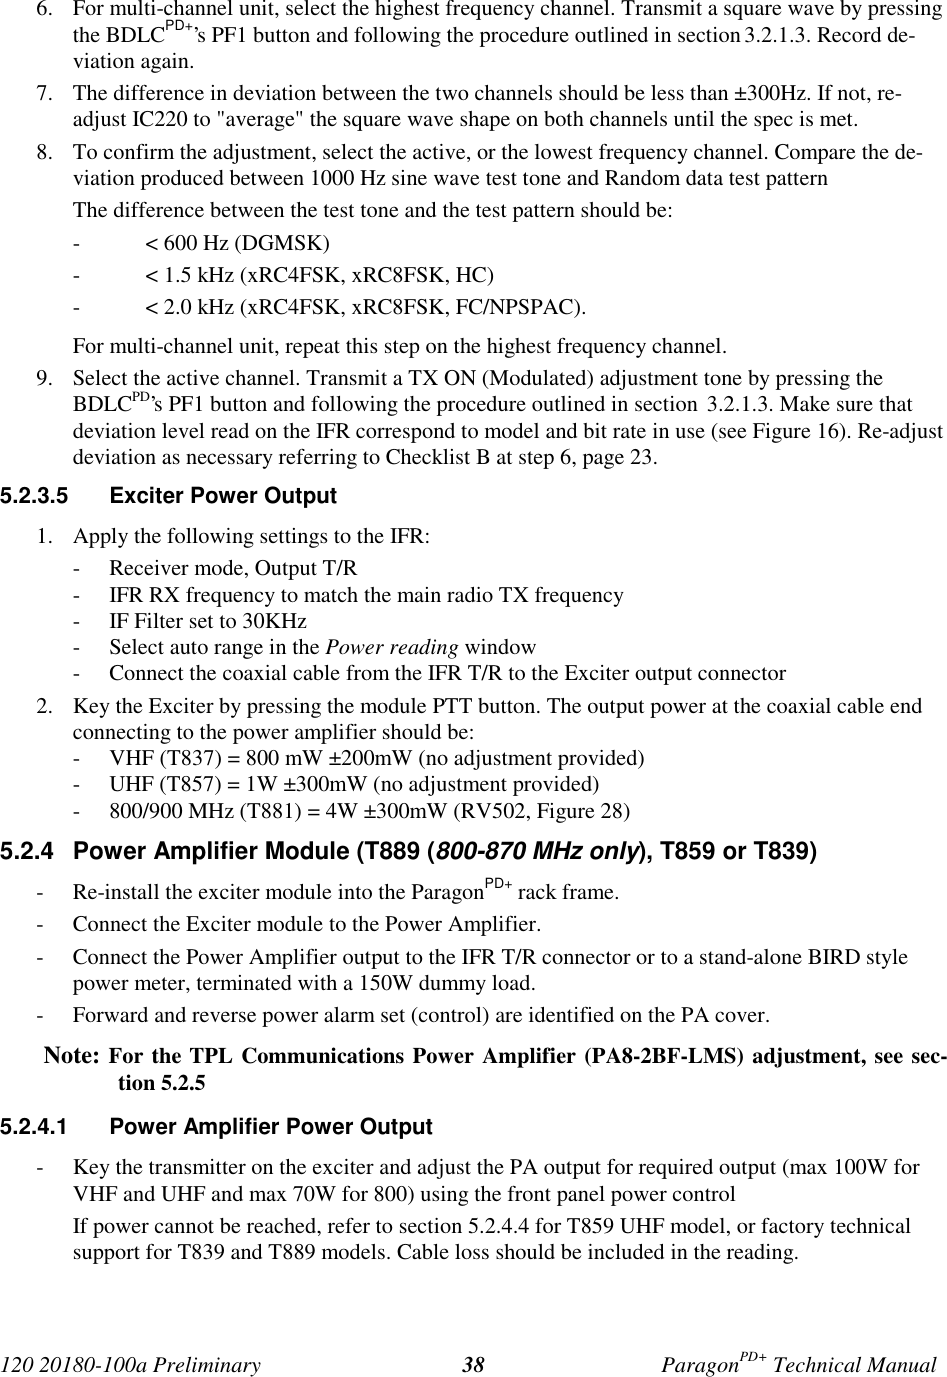 Page 45 of CalAmp Wireless Networks BDD4T85-3 ParagonPD User Manual Parg PD  T100a Prelim